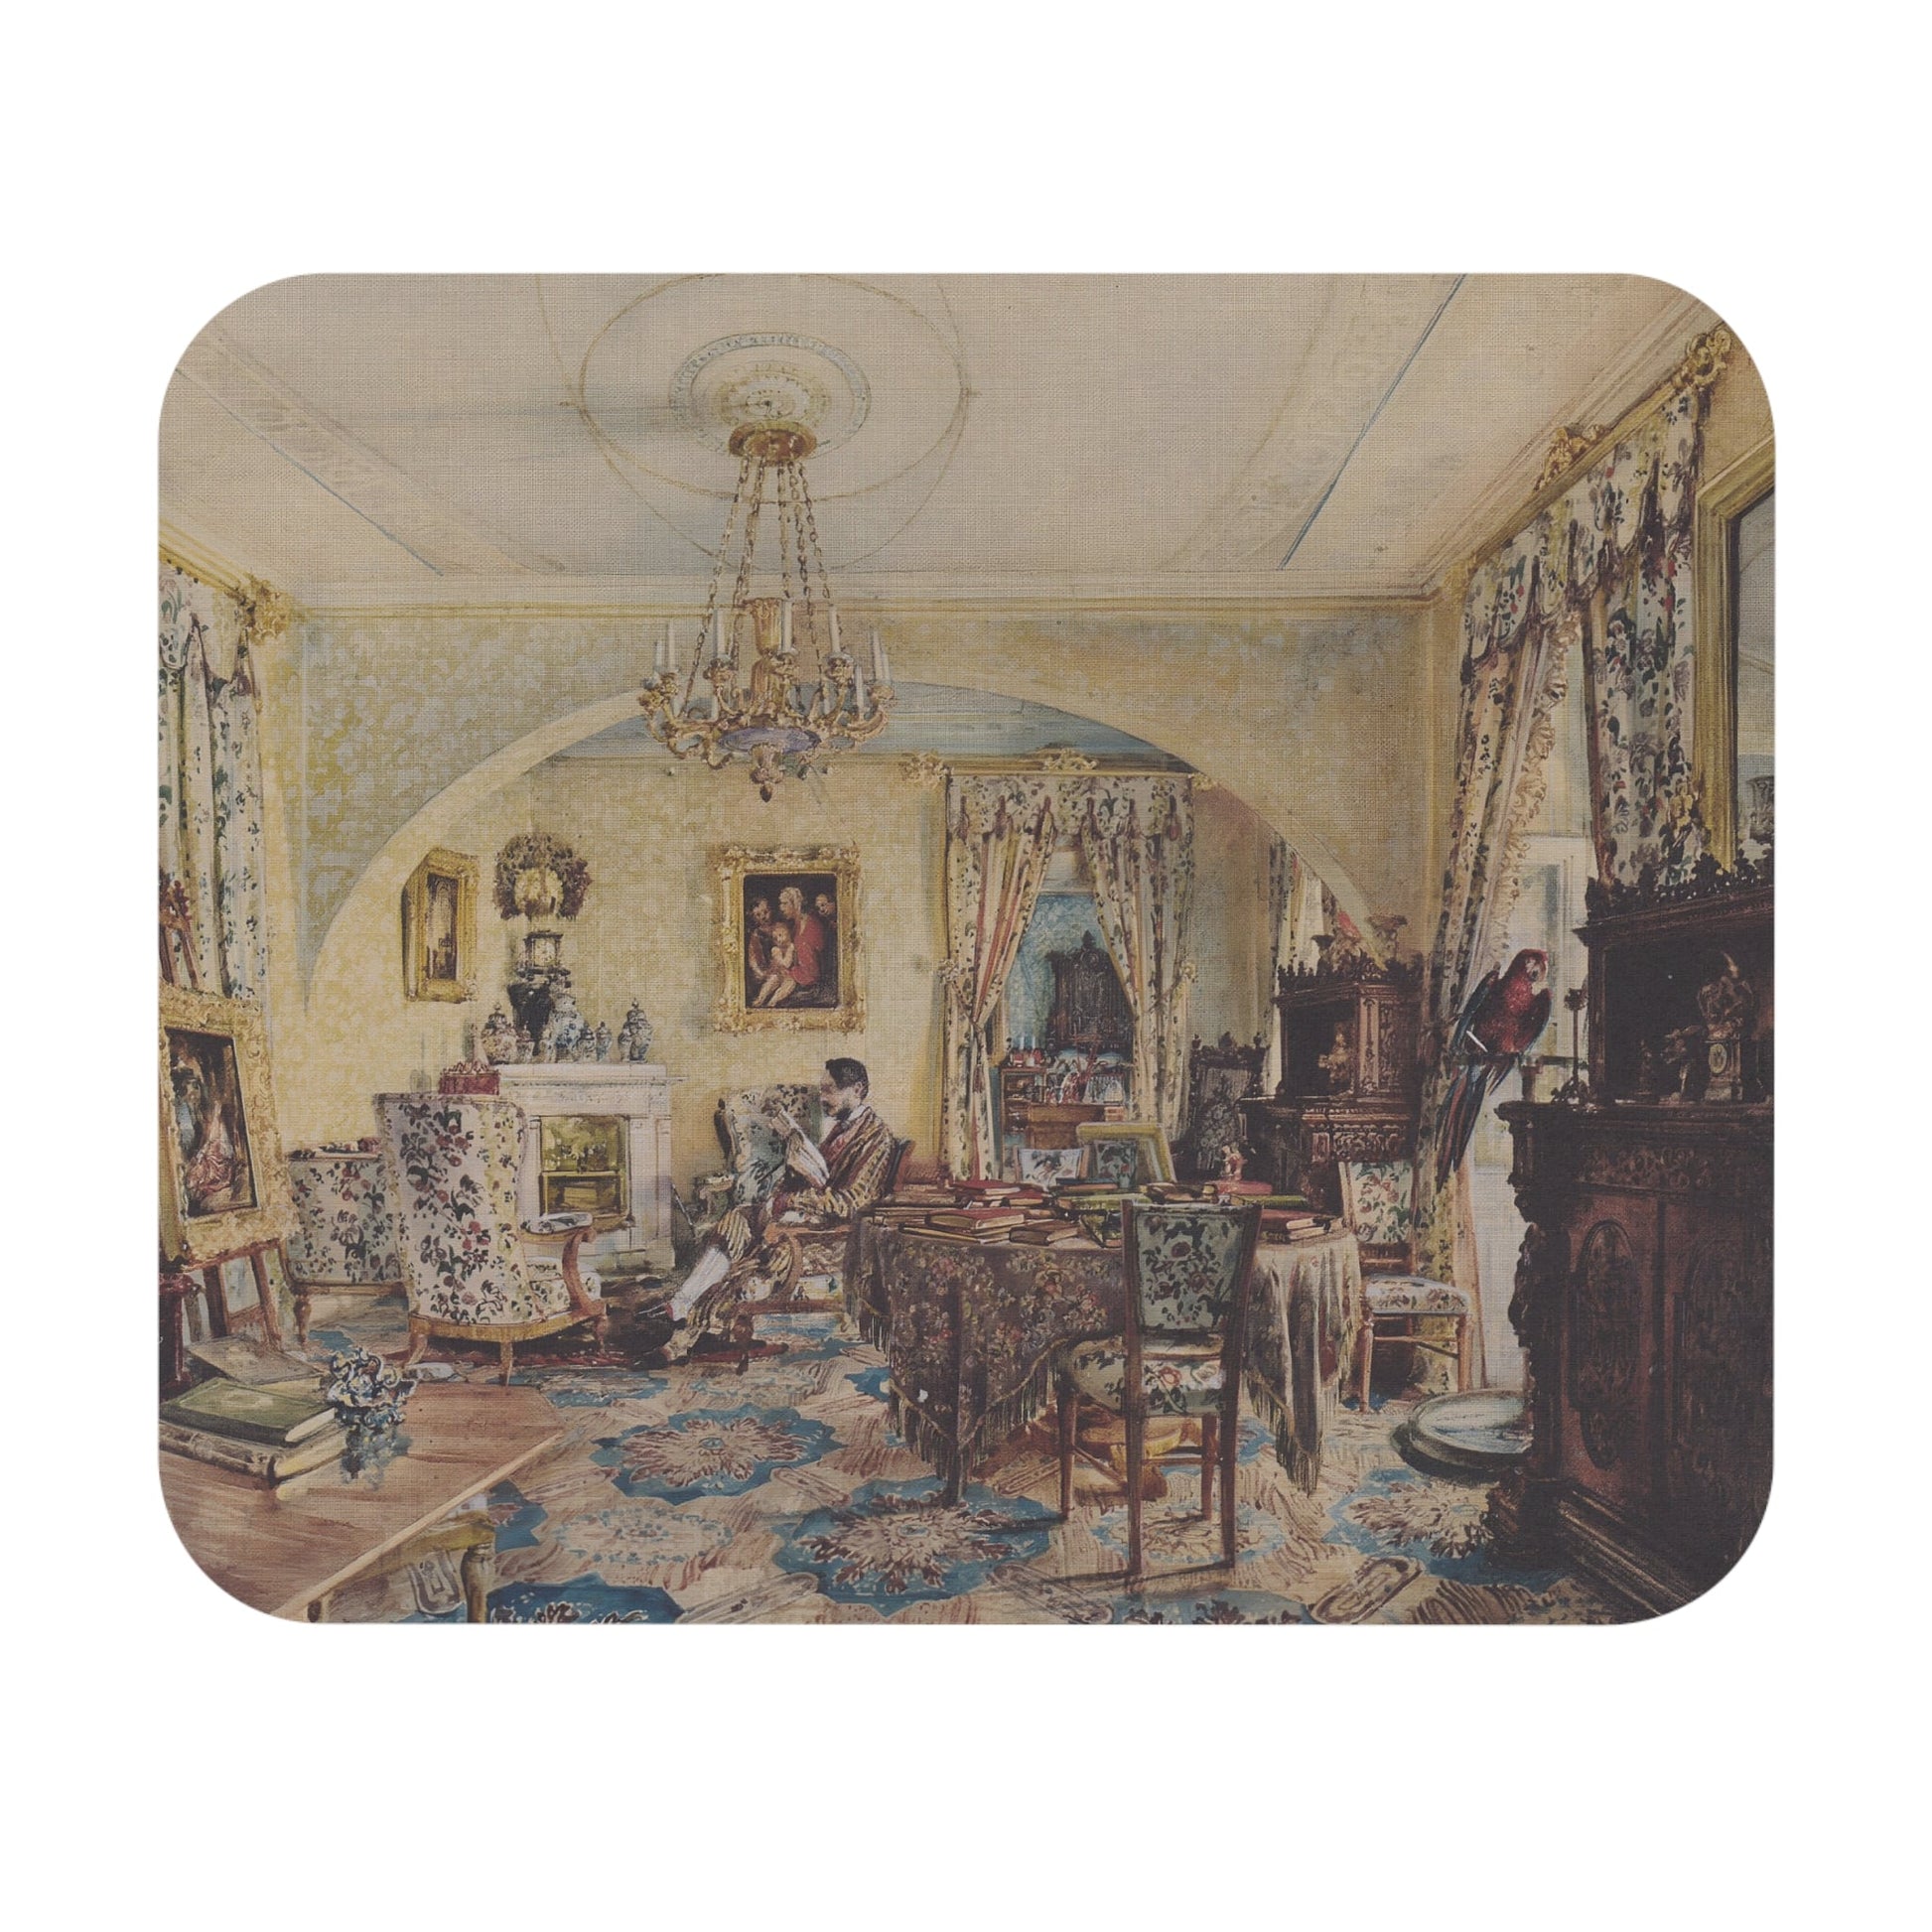 Light Academia Interior Mouse Pad adding a living room aesthetic to desk and office decor.